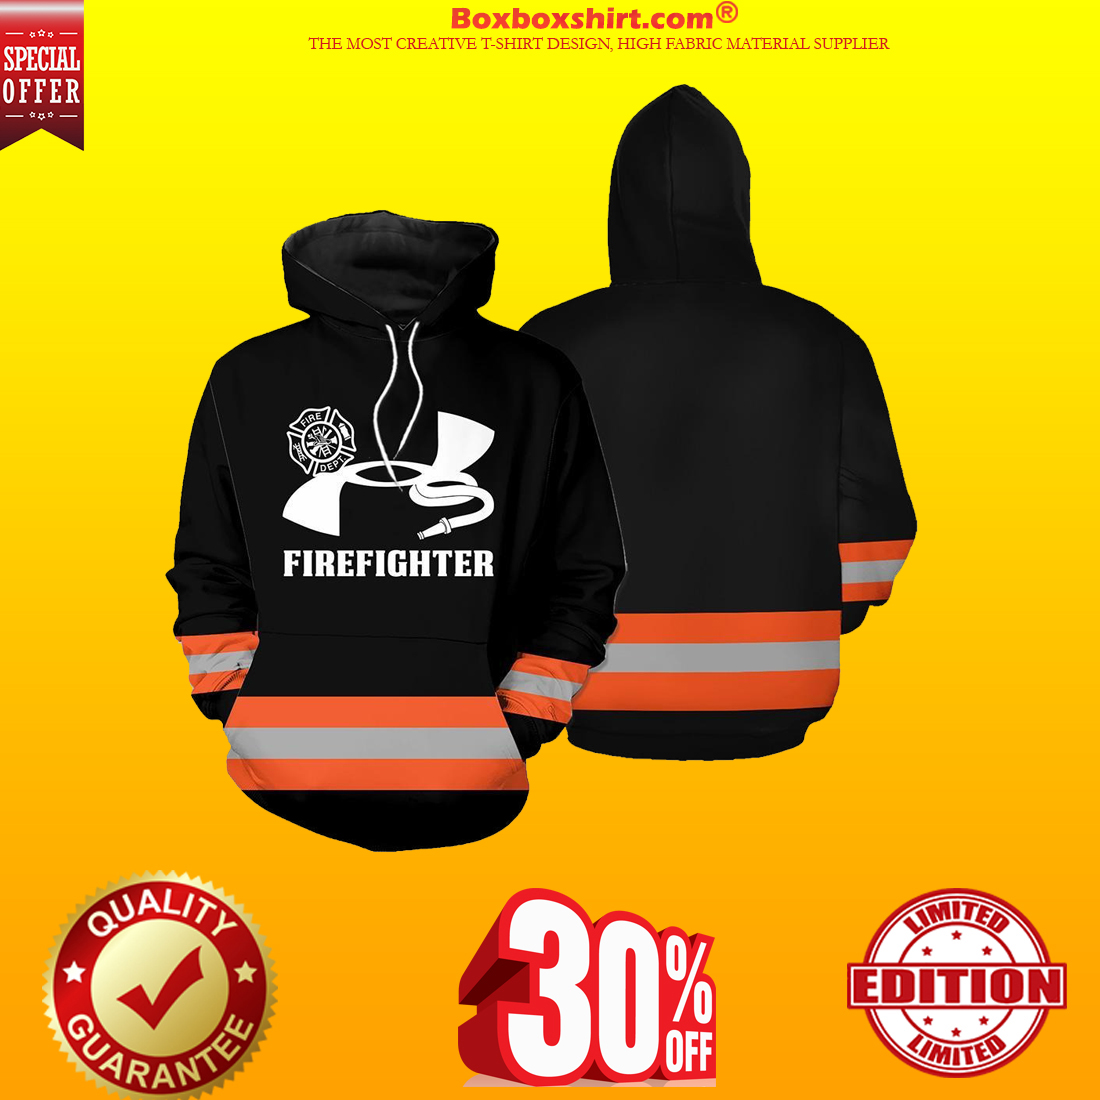 Under Armour firefighter hoodie and 